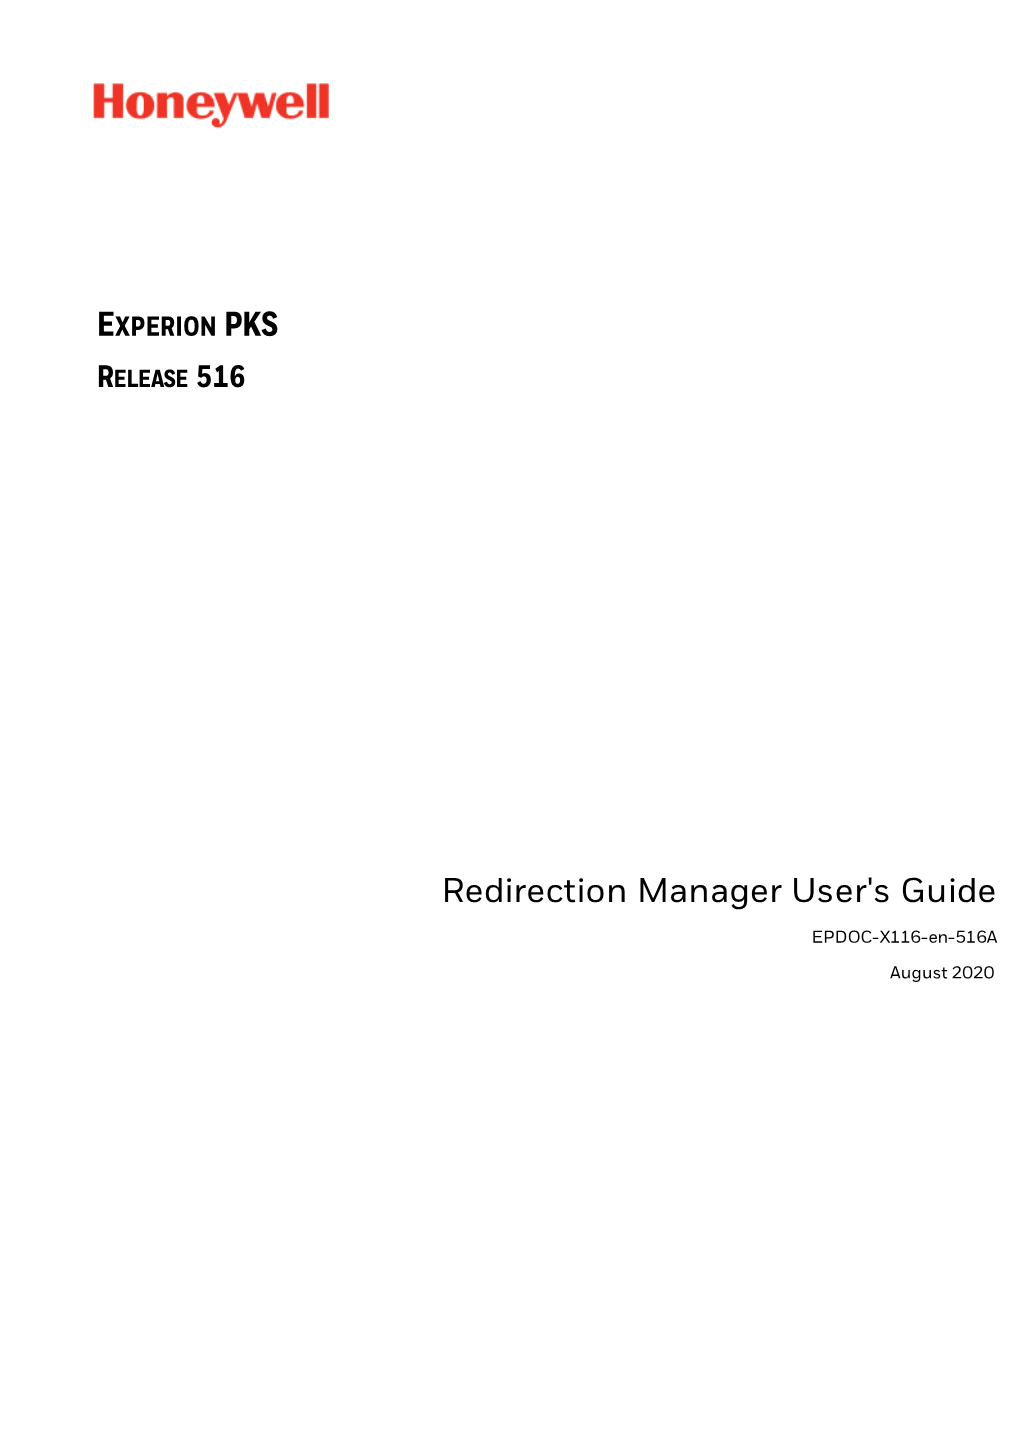 Redirection Manager User's Guide